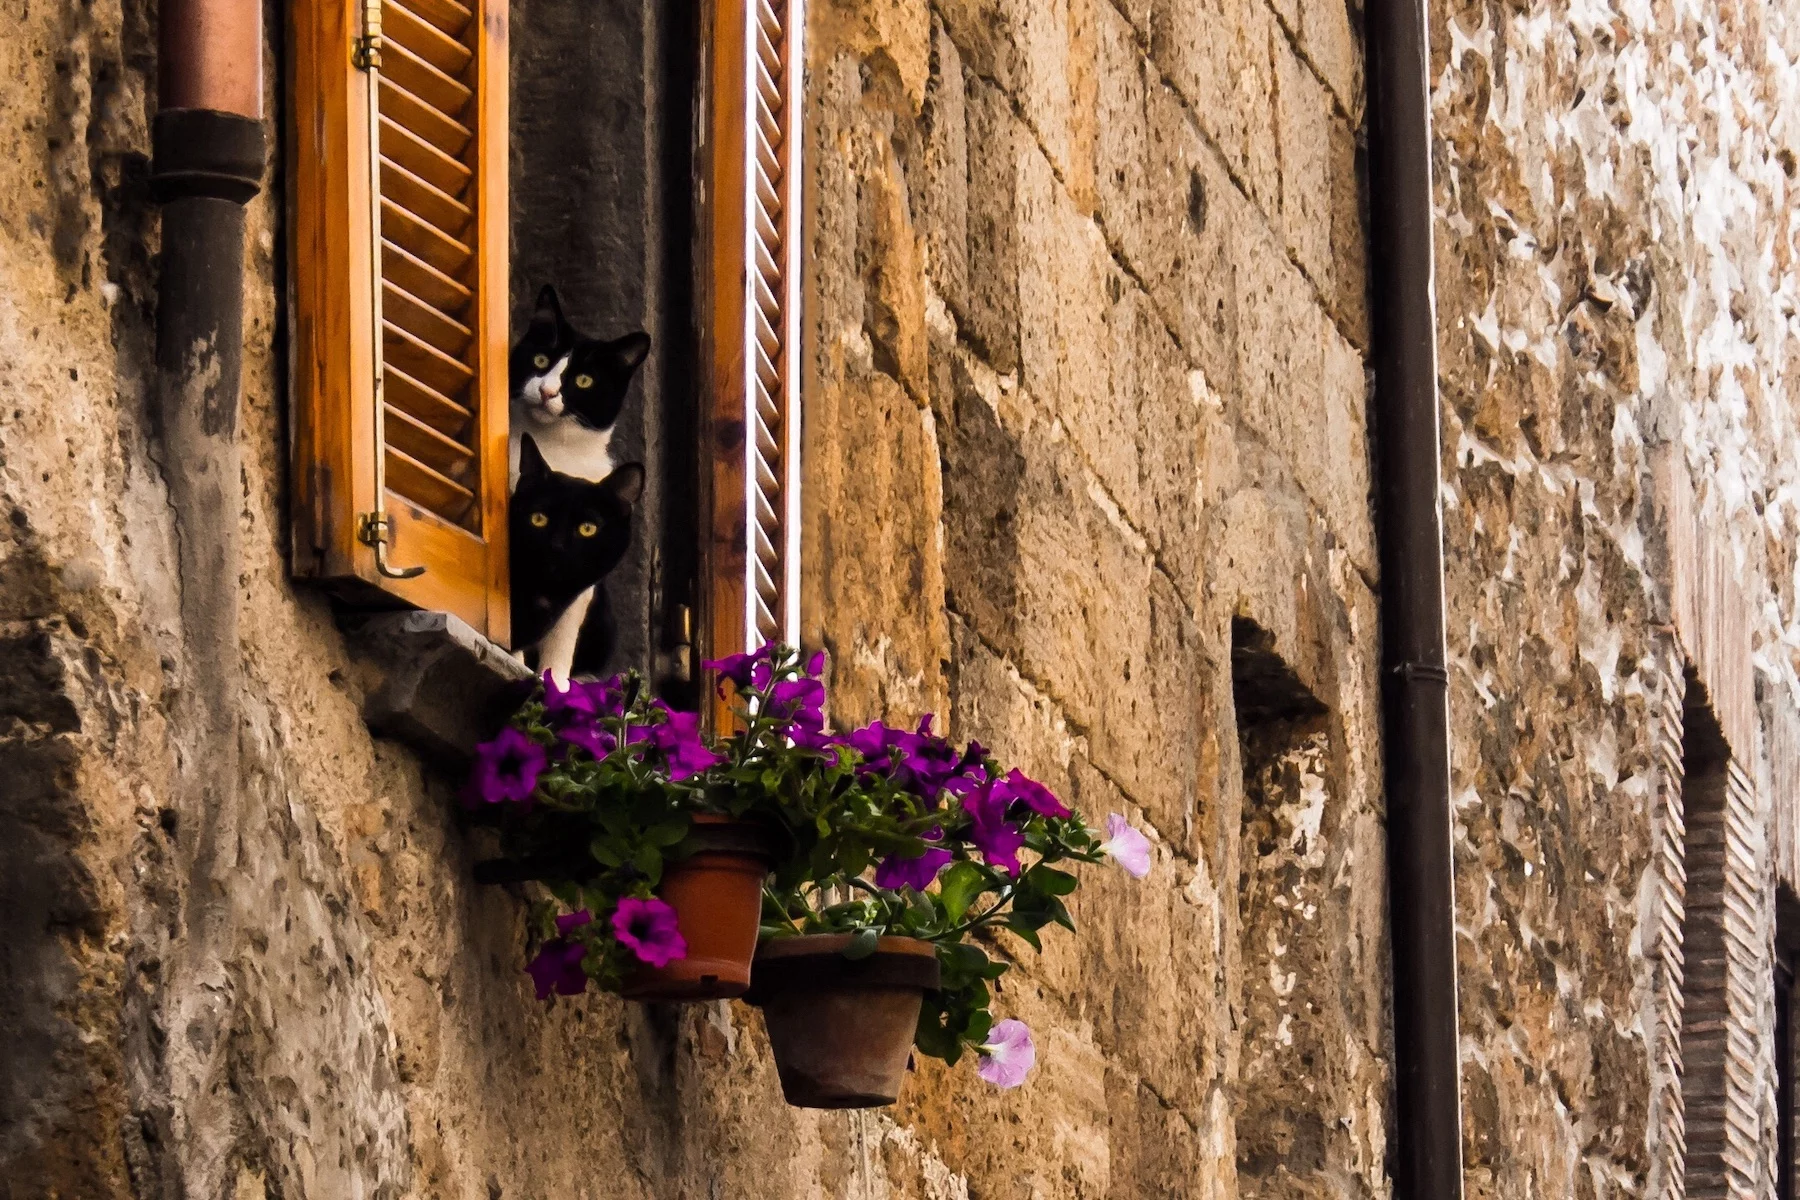 Two cats – one black and one black and white – peek out the flower-lined window of an old building